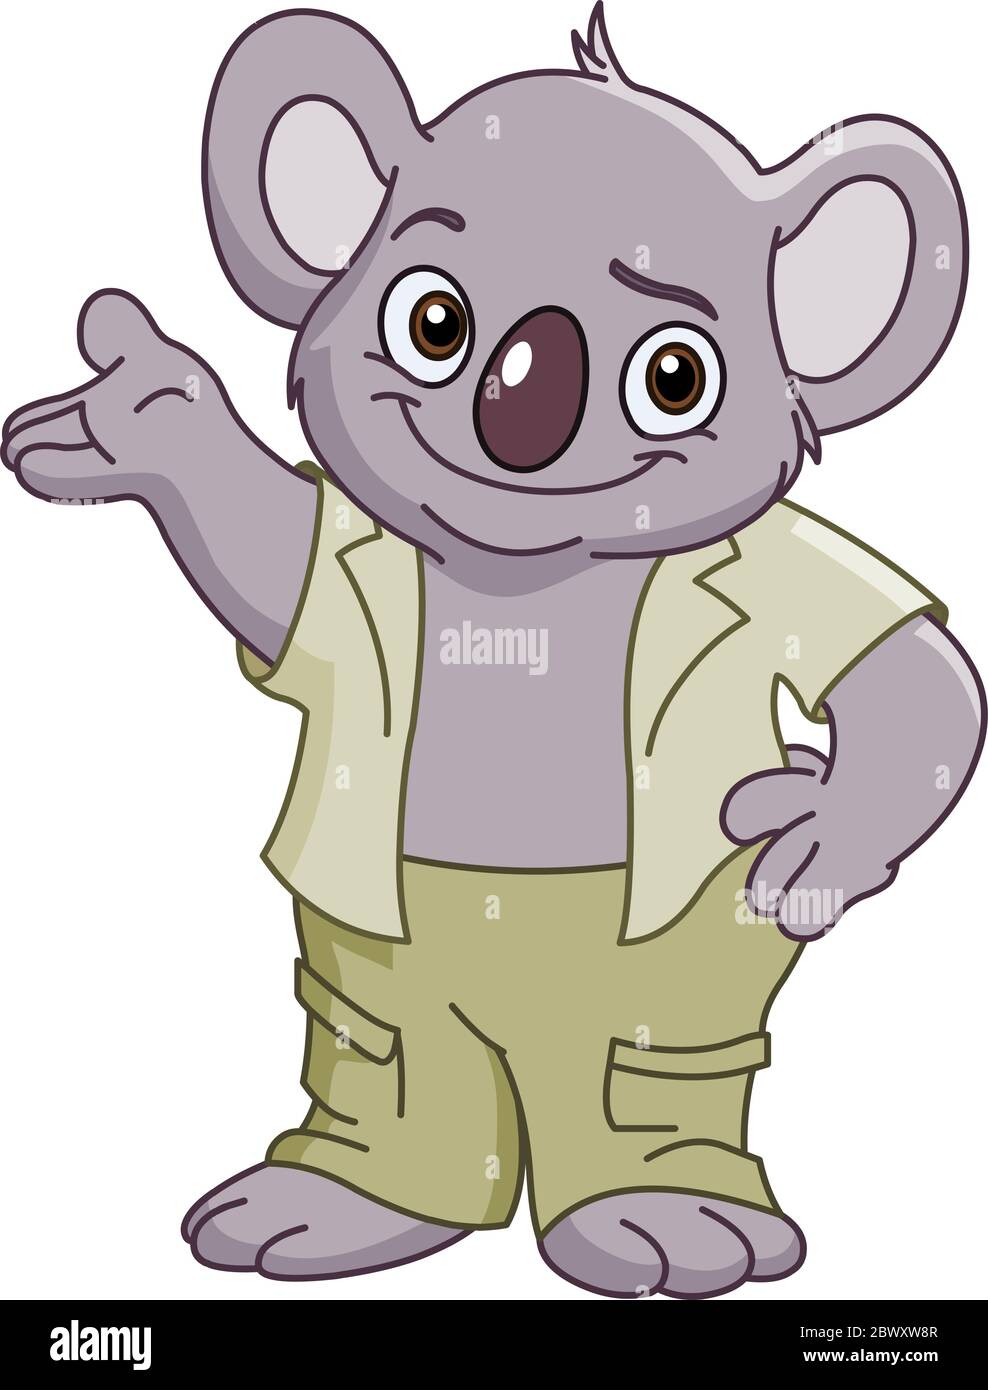 Friendly koala standing and presenting Stock Vector